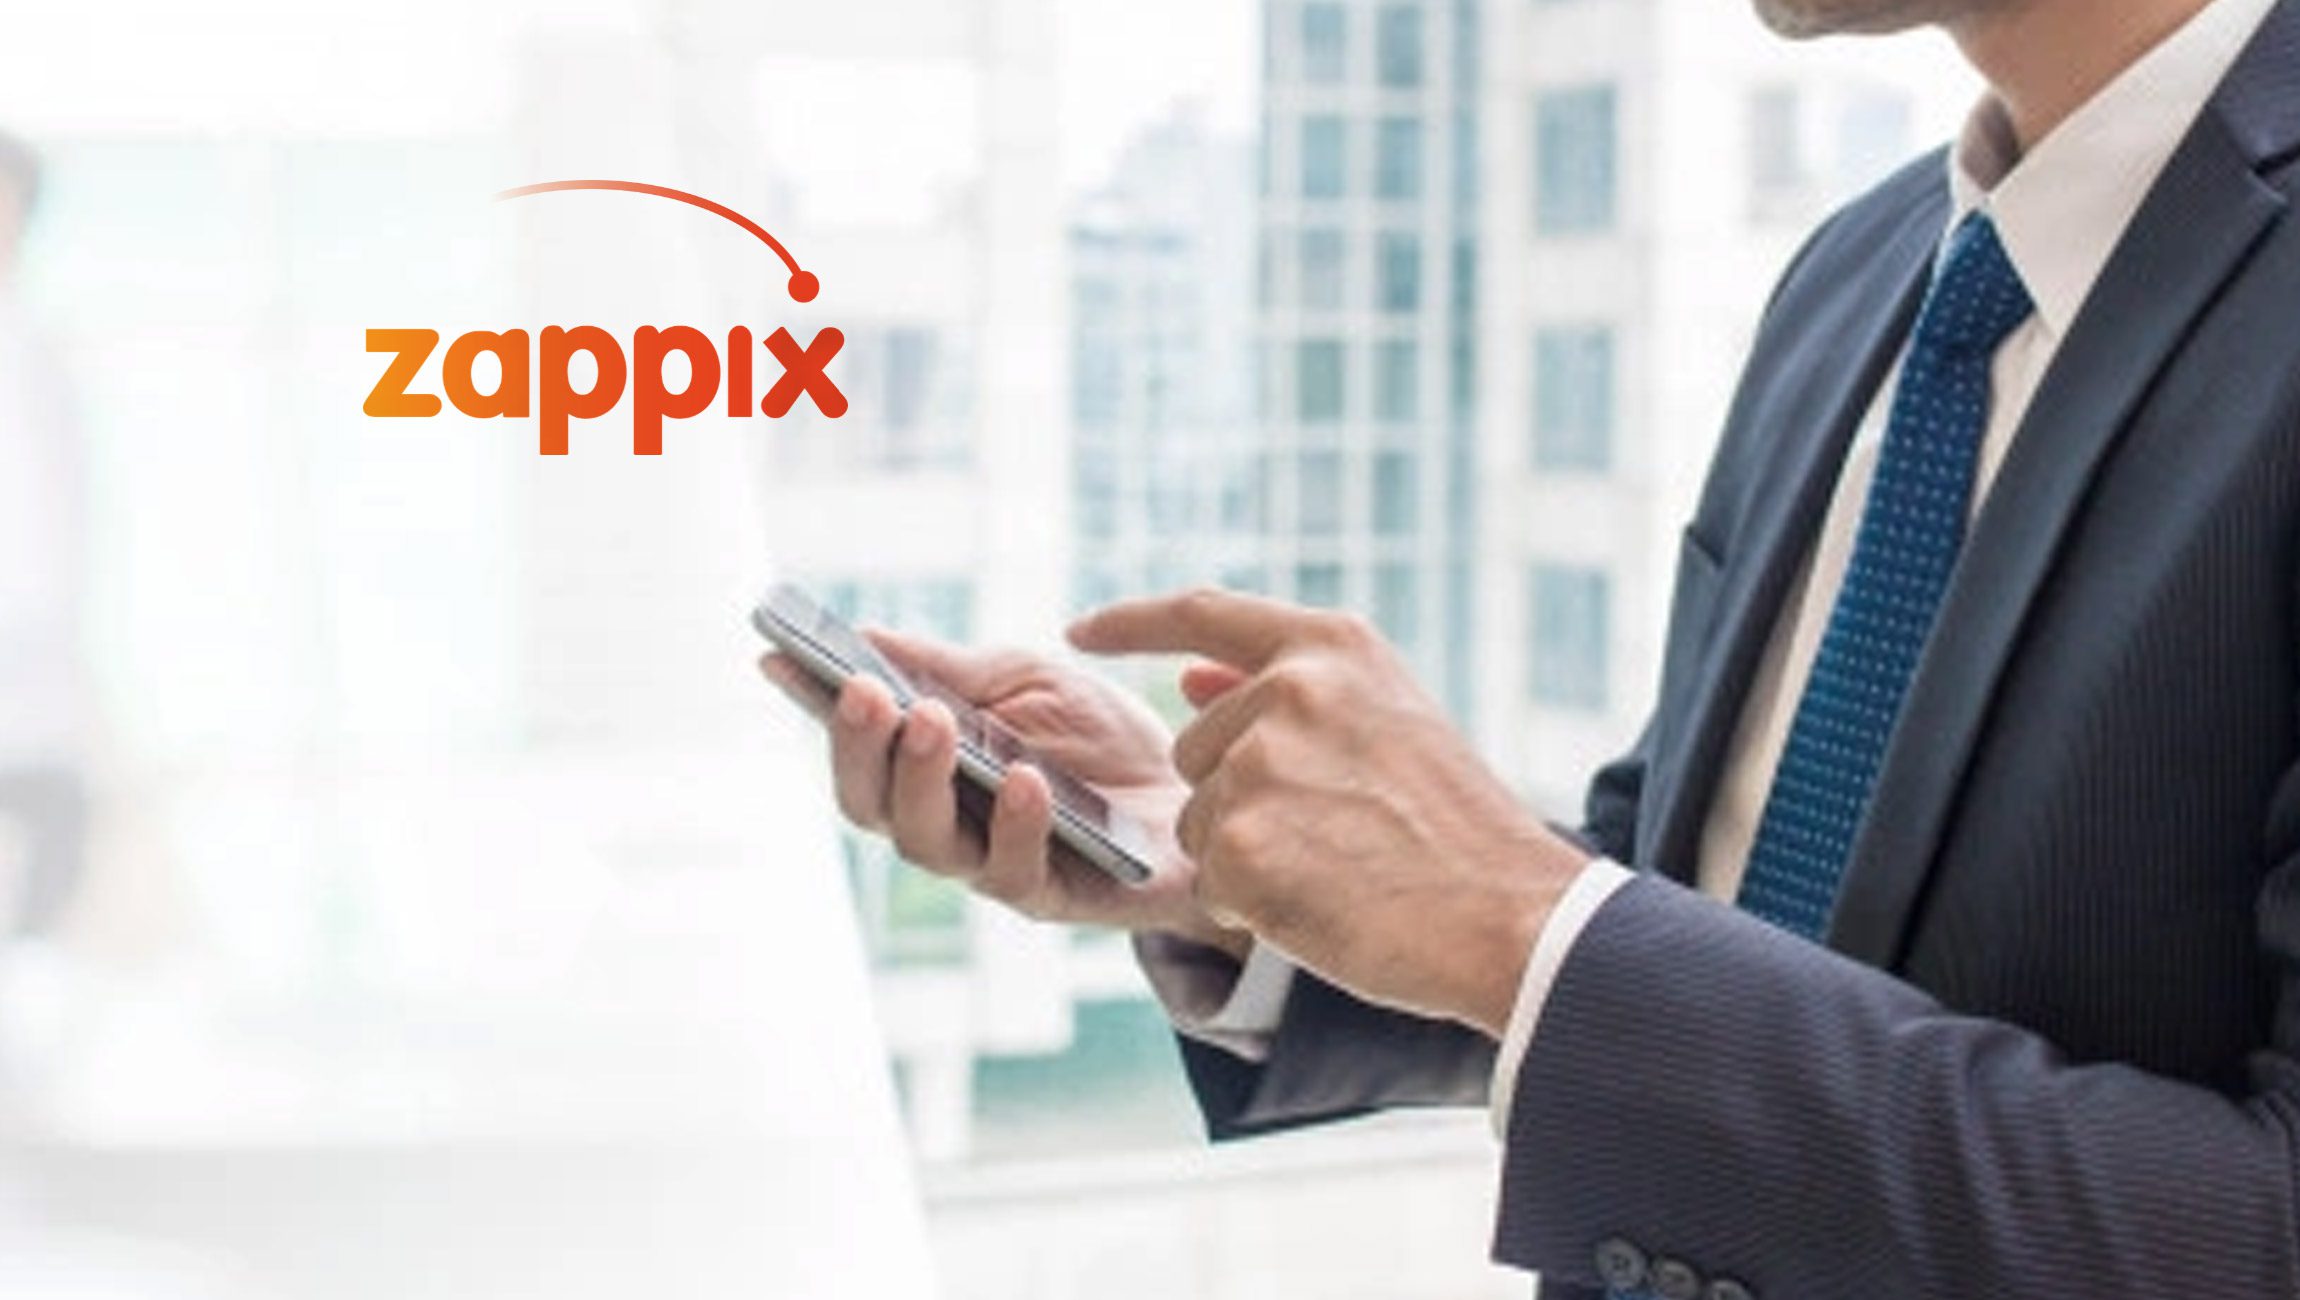 Zappix Signs Two New Customers Through a Strategic Partnership as Self-Service Demand Rises